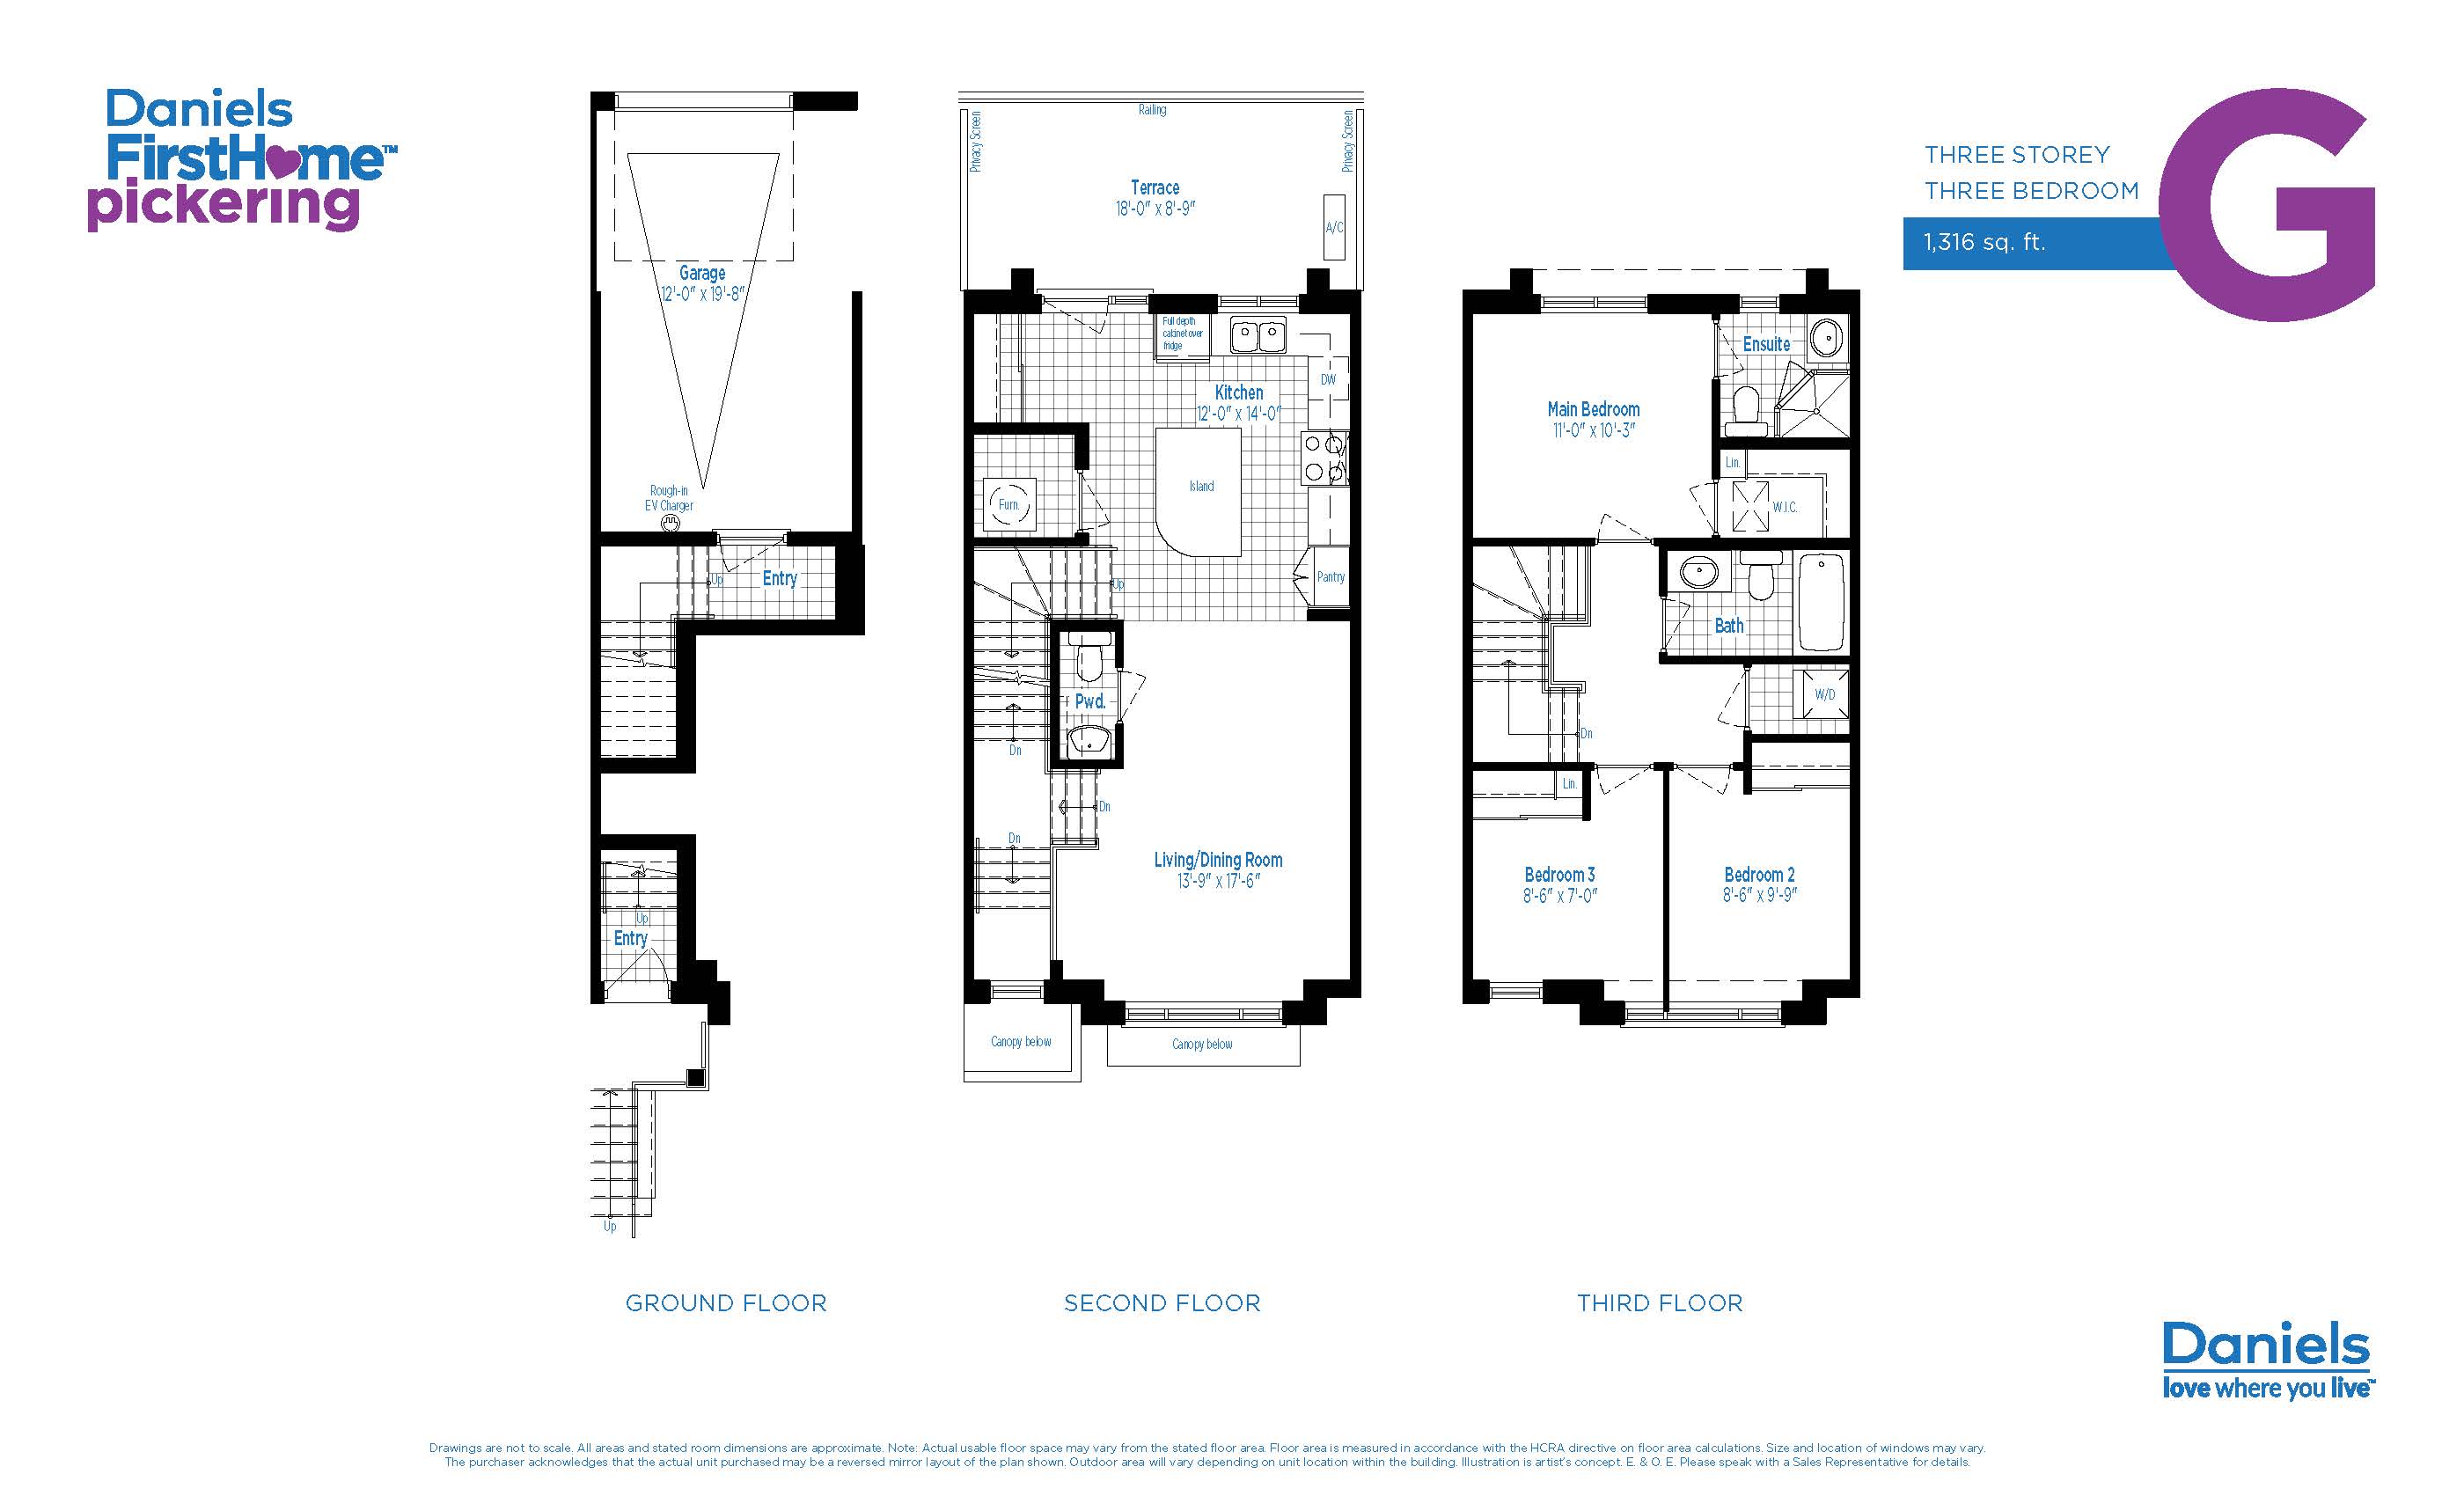  Floor Plan of Daniels FirstHome with undefined beds